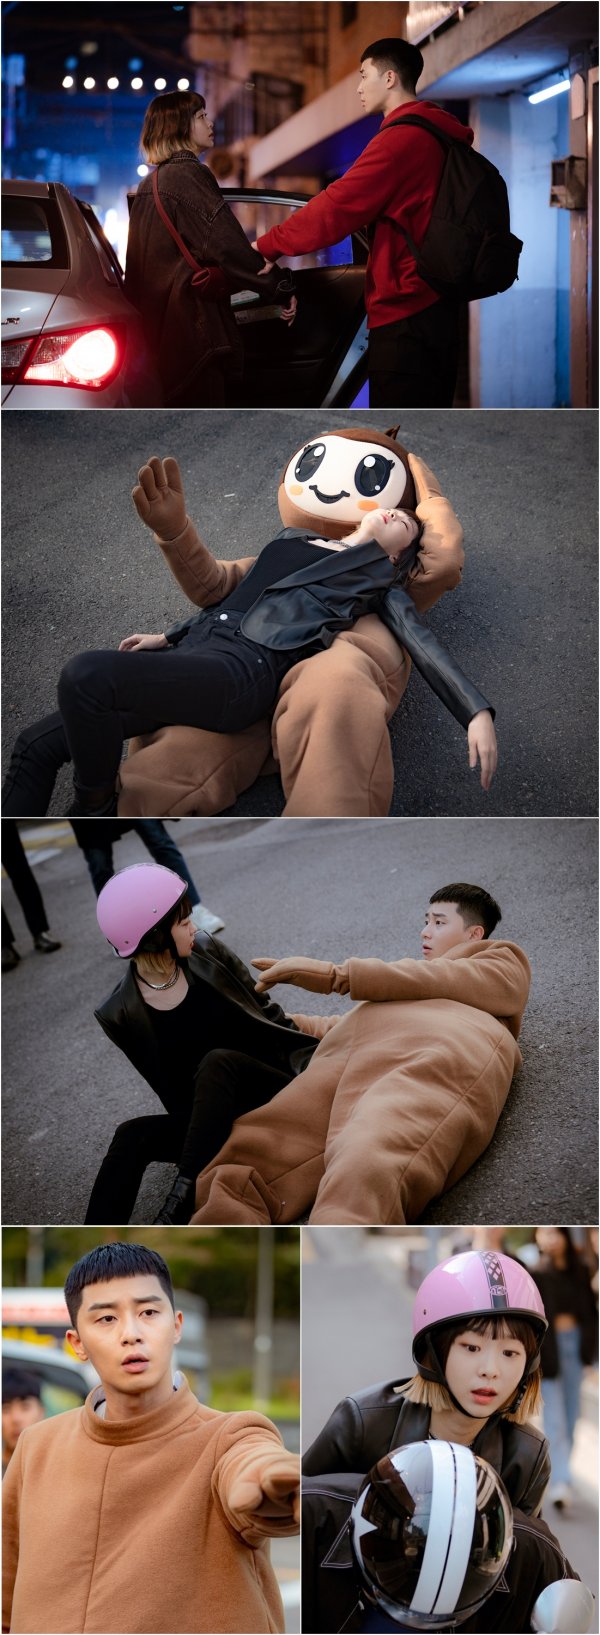 Park Seo-joon and Kim Da-mi finally meet.JTBCs production team of One Clath (director Kim Sung-yoon, playwright Cho Kwang-jin) unveiled the first meeting of Park Seo-joon and Kim Da-mi, which can not be more intense than this, on the 6th, ahead of the third broadcast.After a hot wait, One Klath, who met with viewers, fascinated viewers from the first broadcast, foreshadowing the hip-up Rebellion of youths who have united with stubbornness and passengerism in an unreasonable world.Above all, Park Seo-joons presence, which had returned to the same group of hot-blooded youthful Park Seo-joon, was overwhelming.In the last broadcast, the death of his father led to a terrible link between Park and Jang Dae-hee (Yoo Jae-myung), the president of Jangga.Roy, who was released from prison with a boiling heart in the word revenge, revealed his dream of setting up a small store in Itae One.Seven years later, Roy, who entered Itae One to achieve his dream, reunited with Oh Su-ah (Kwon Na-ra), amplifying his expectations.Another person who will change the fate of Roy, Kim Da-mi, is about to make a full-scale start.The photo shows the first meeting between Roy and Joy, and Joy, who is about to get into a taxi, and Roy, who snatched his wrist, foresaw an unusual first meeting.The emergence of Joy, who has stimulated the just Xiao Xinnam Park, has already attracted expectations.Another photo released together attracts attention from two people who have been reunited on the streets of Itae, and Joy, who is divided into two bodies as if he passed out over a person wearing a doll mask, attracts attention.The main character in the doll is Roy, Xiao Xin, and the extraordinary personality of the influencer Joy, who adds to the expectation of what synergy they will receive.Especially, Kim Da-mi, who made a topic by decorating the first scene of Drama, is focused on his performance.In the third episode, which airs on the 7th, Itae Ones Sweet Night, which is filled with blood and sweat from Roy, finally opens the door.Here, the meeting between Joy Seo and Jang Geun-soo (Kim Dong-hee), the second son of Jangga, is expected to bring a stir to the single night.The first meeting between Roy and Joy is exciting from the start, said the production team of One Klath.I think you can feel Joys unique charm at once, he said. Please watch the beginning of Roys turbulent one entry, the beginning of the hot Rebellion.The third episode of One Klath will be broadcast at 10:50 pm on the 7th.